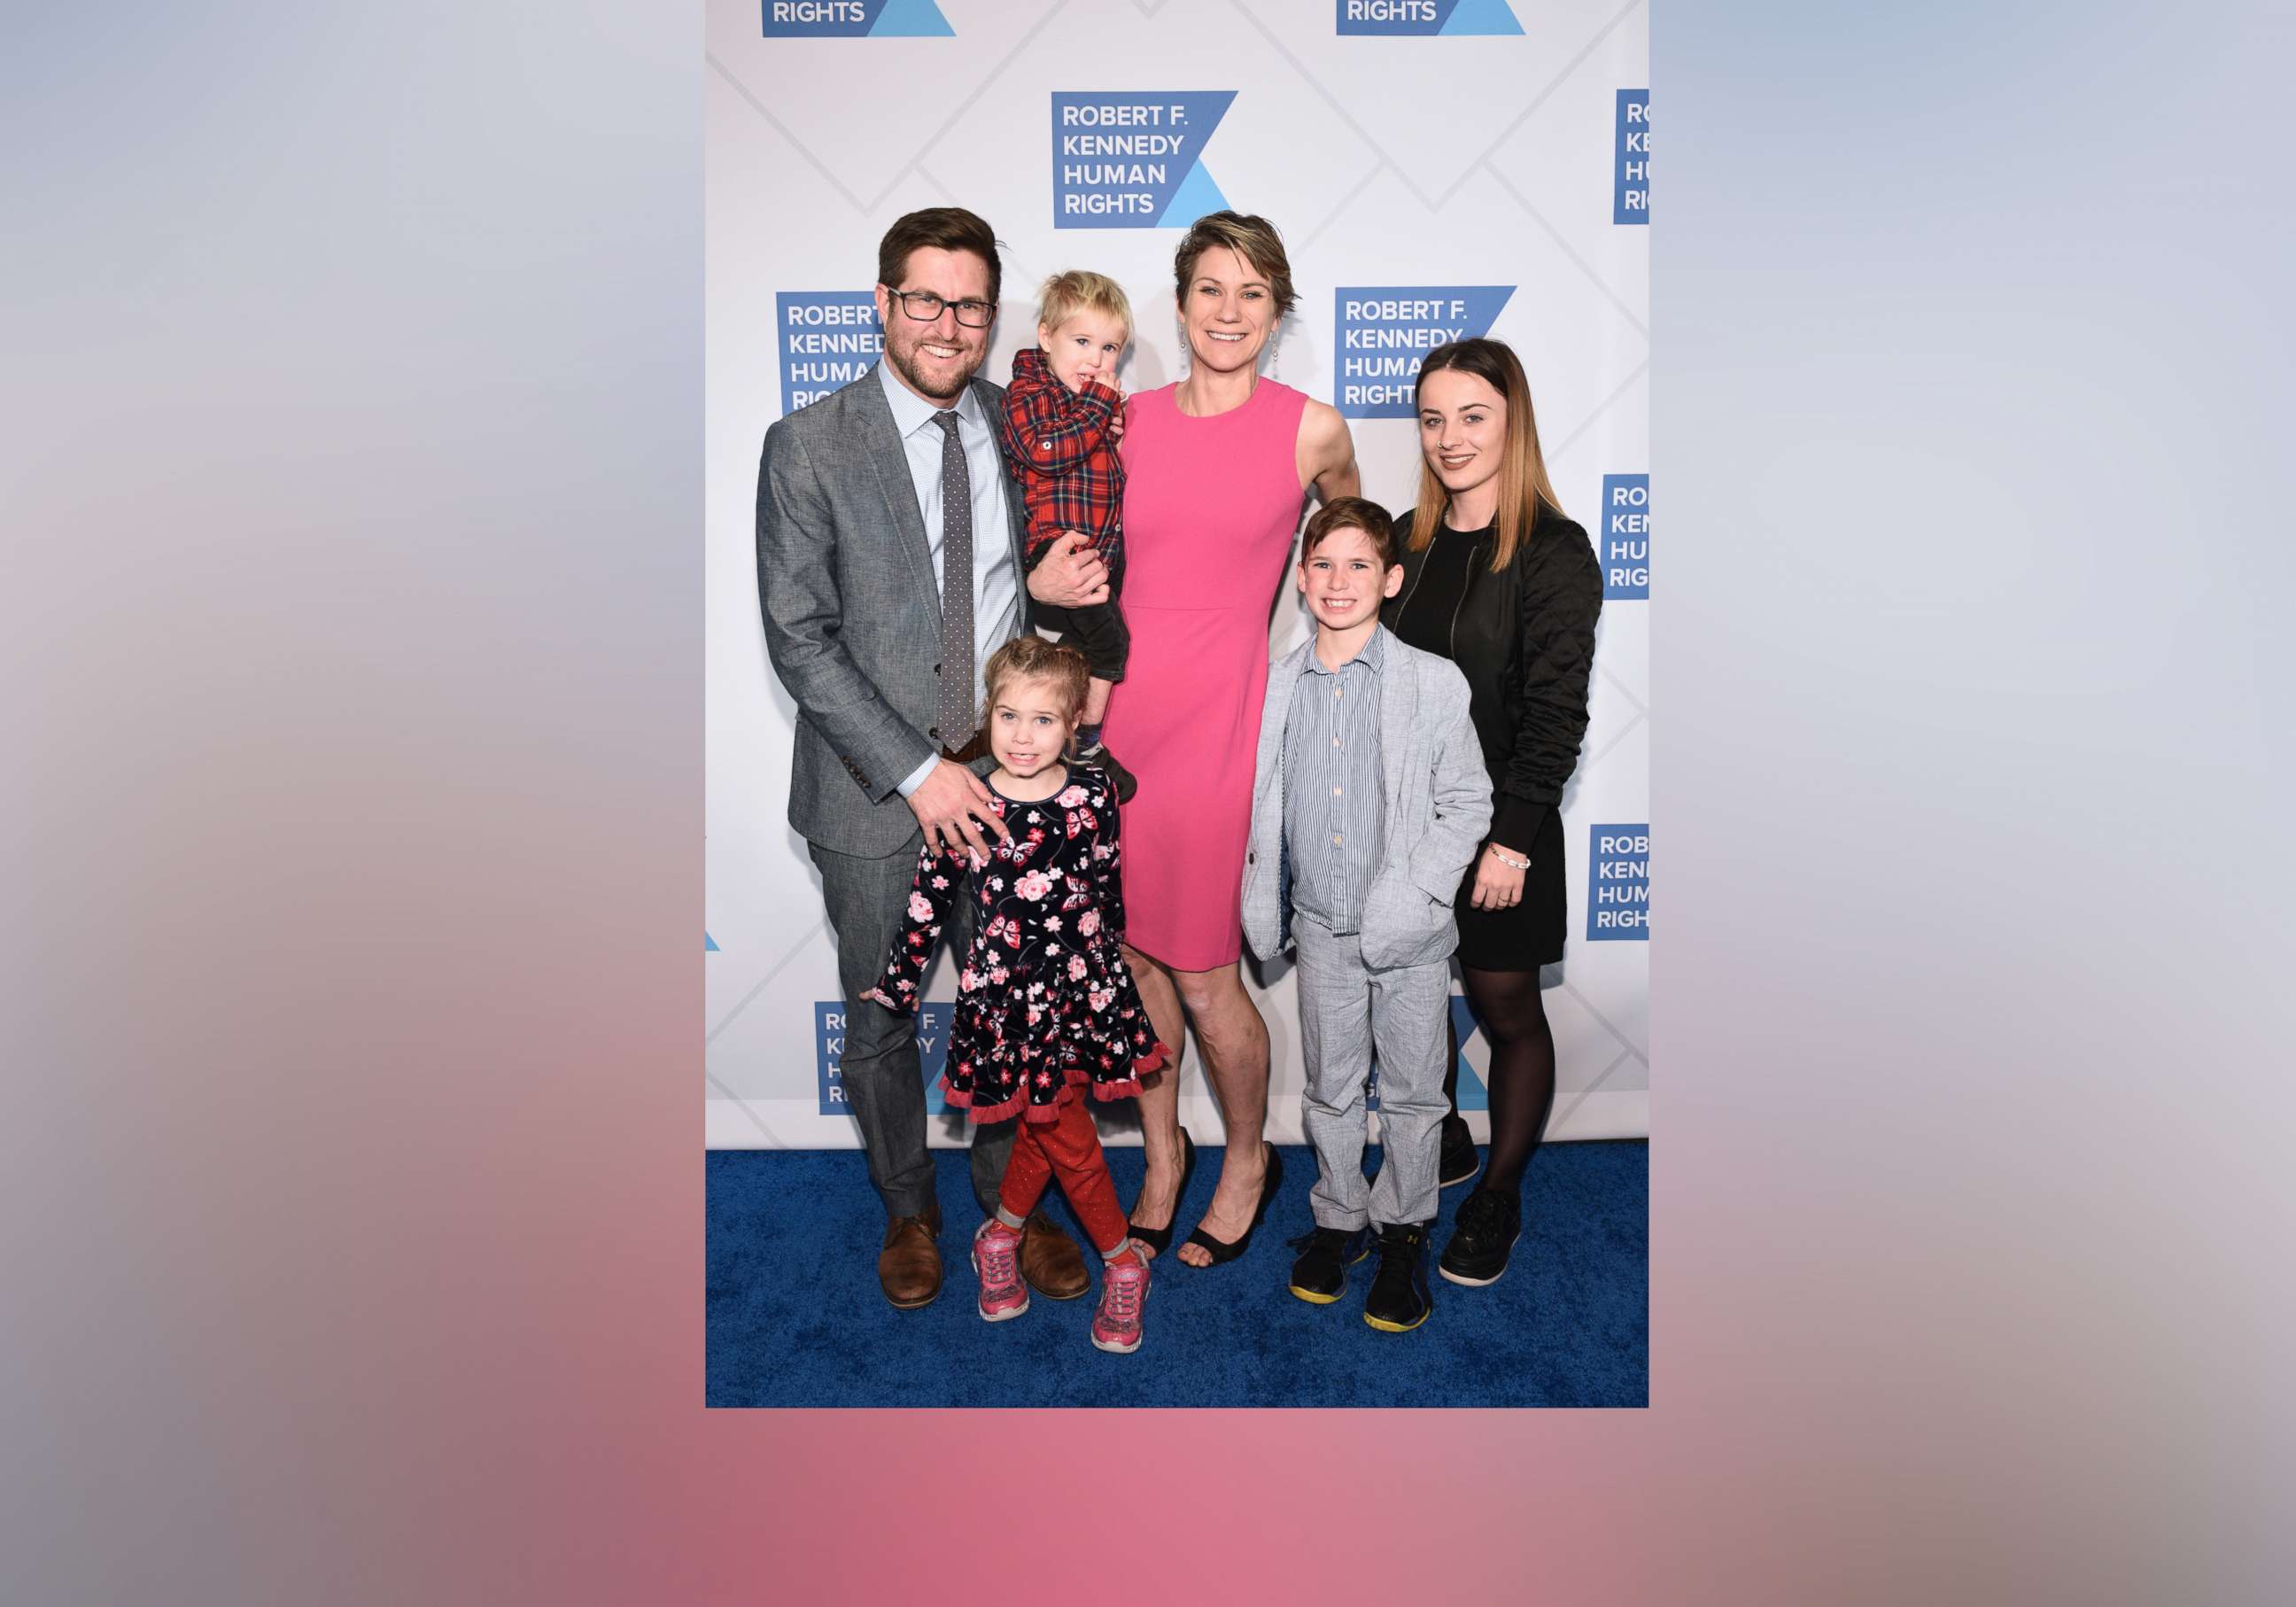 PHOTO: David McKean, Maeve Kennedy Townsend Mckean and family attend the Robert F. Kennedy Human Rights Hosts 2019 Ripple Of Hope Gala & Auction, in New York City, on Dec. 12, 2019.